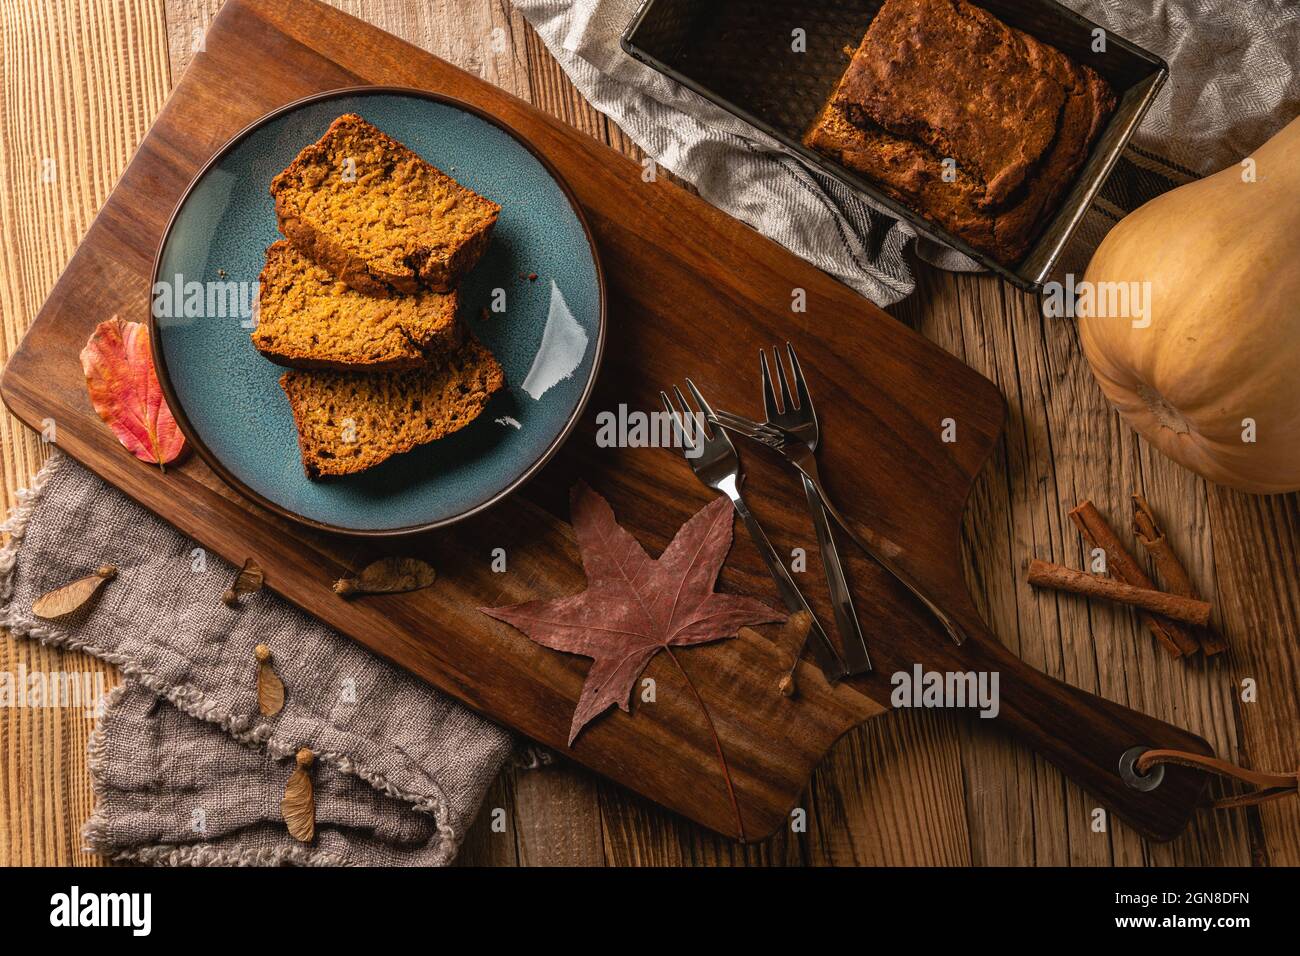 Sliced pieces of vegan sweet and spicy pumpkin cake on wooden cutting board and rustic table. Traditional treat in autumn for Thanksgiving, Halloween. Stock Photo